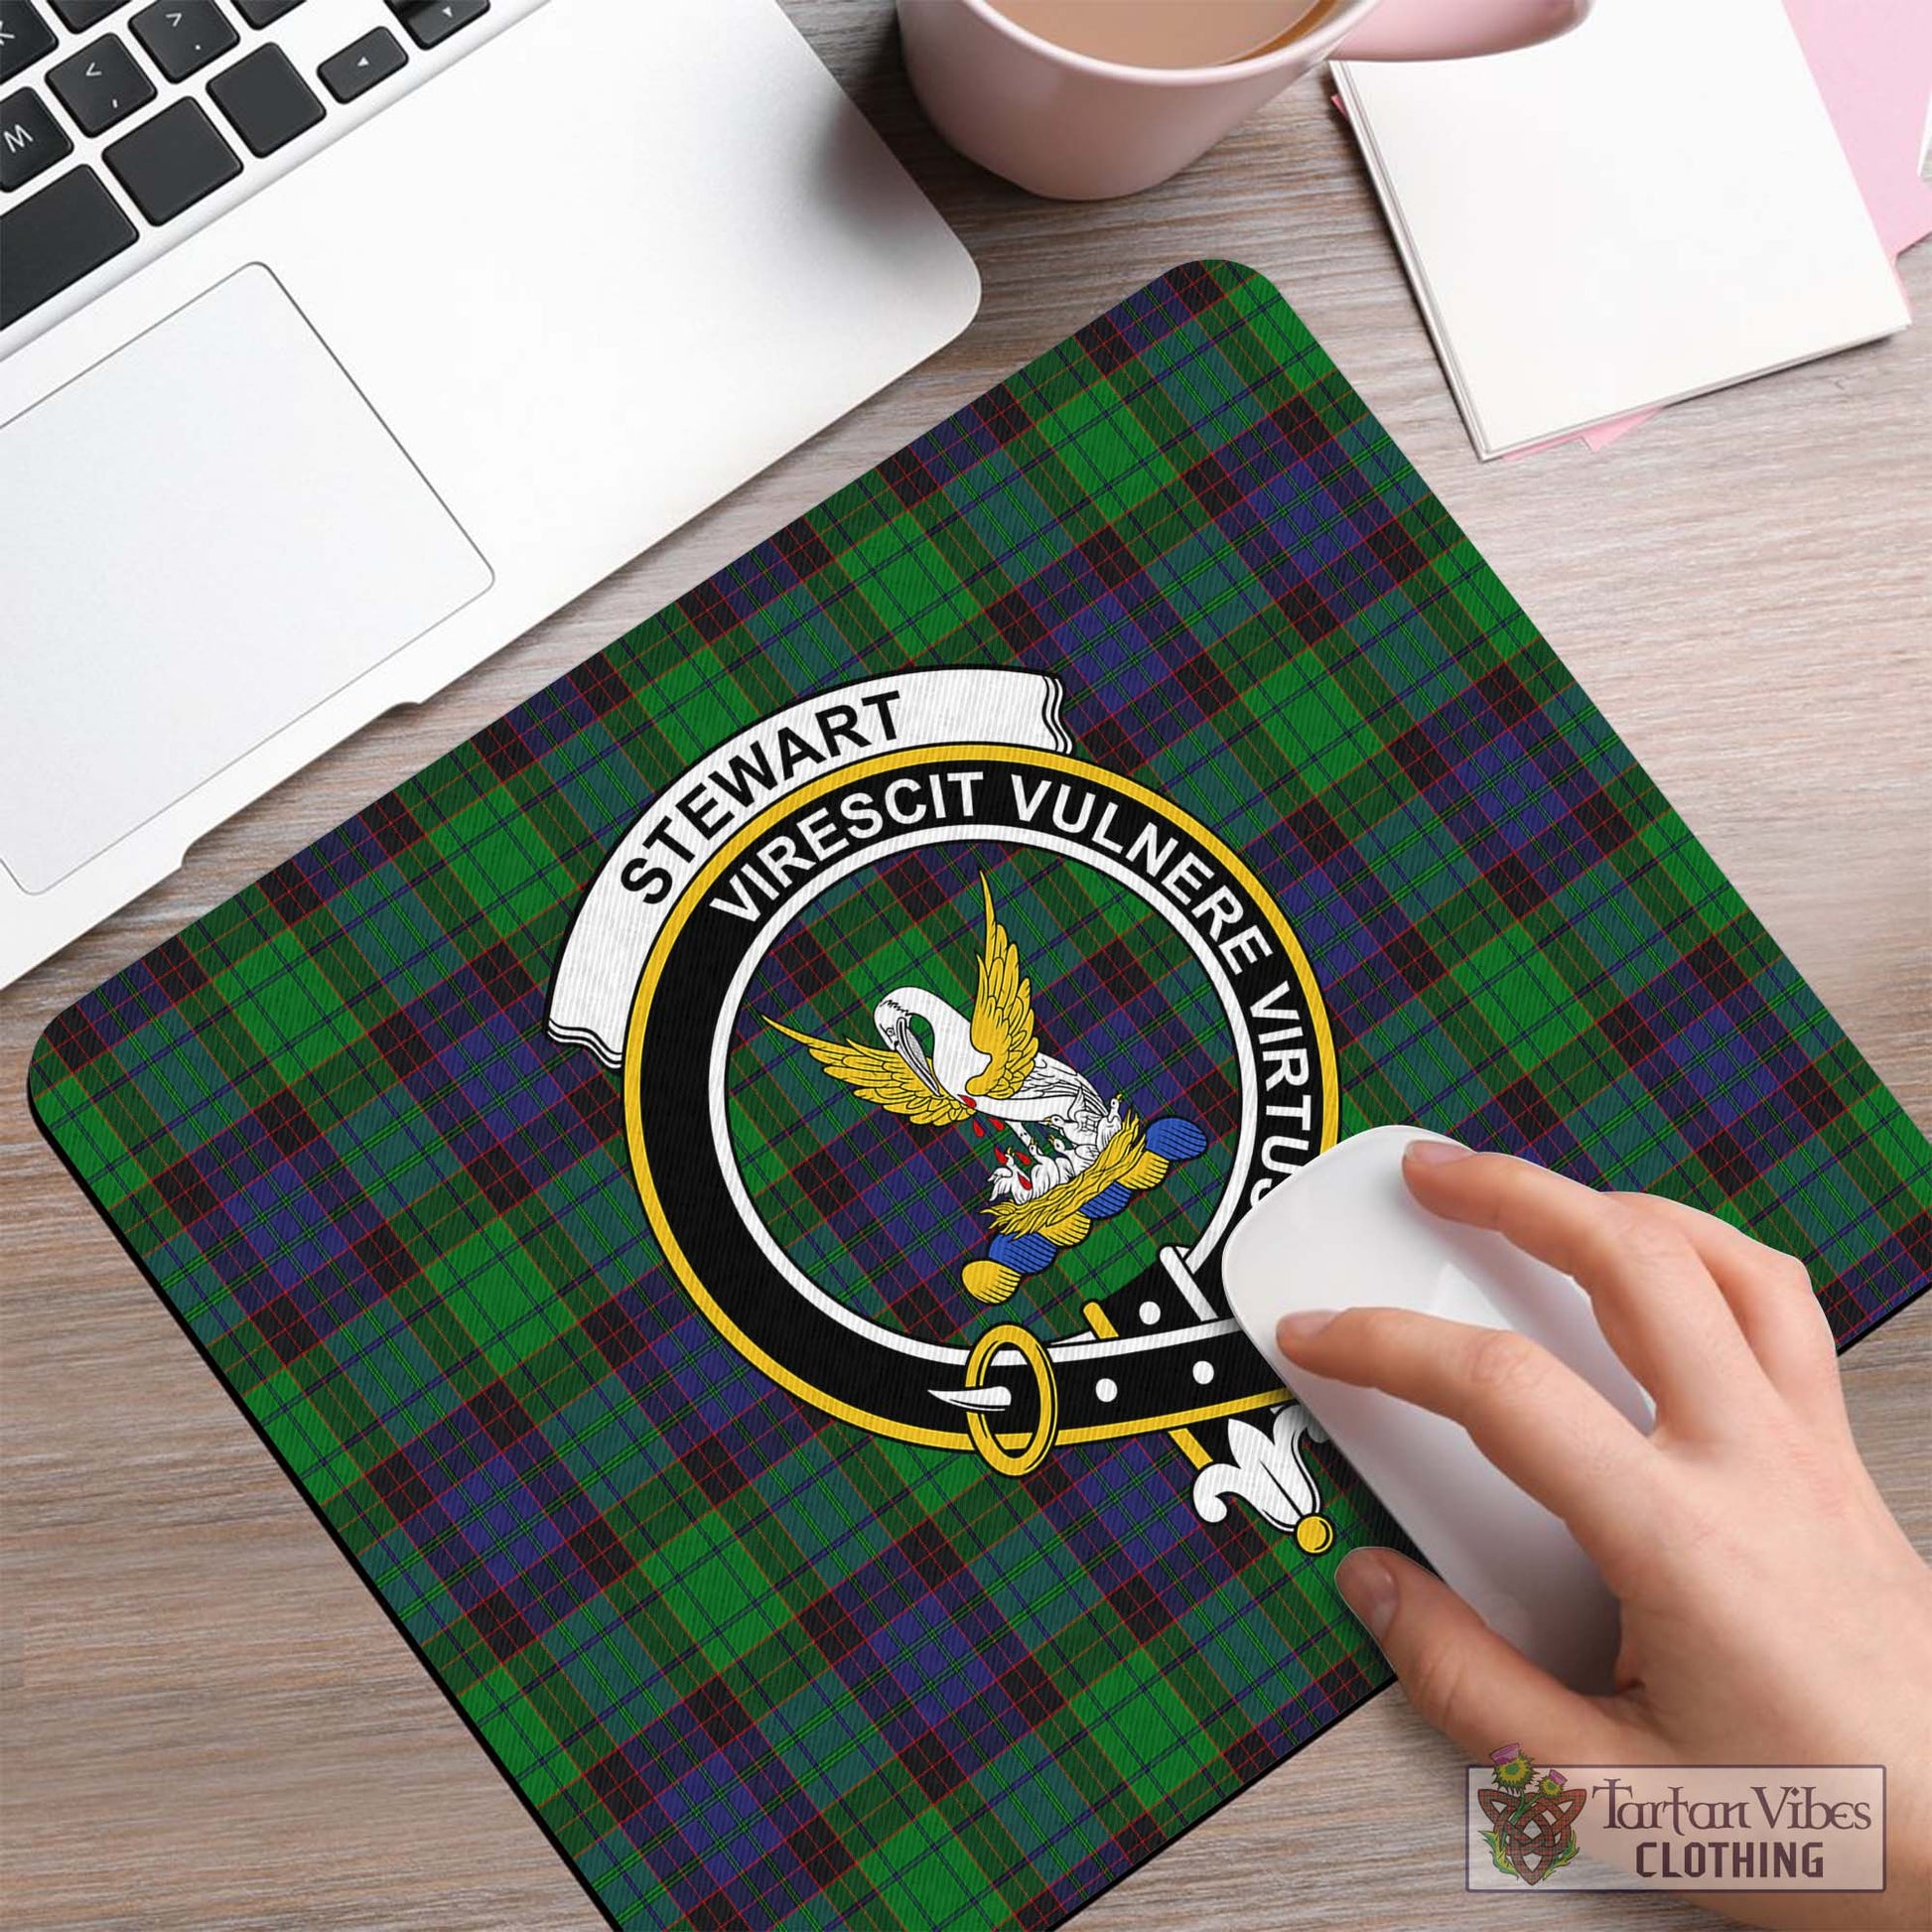 Tartan Vibes Clothing Stewart Old Modern Tartan Mouse Pad with Family Crest